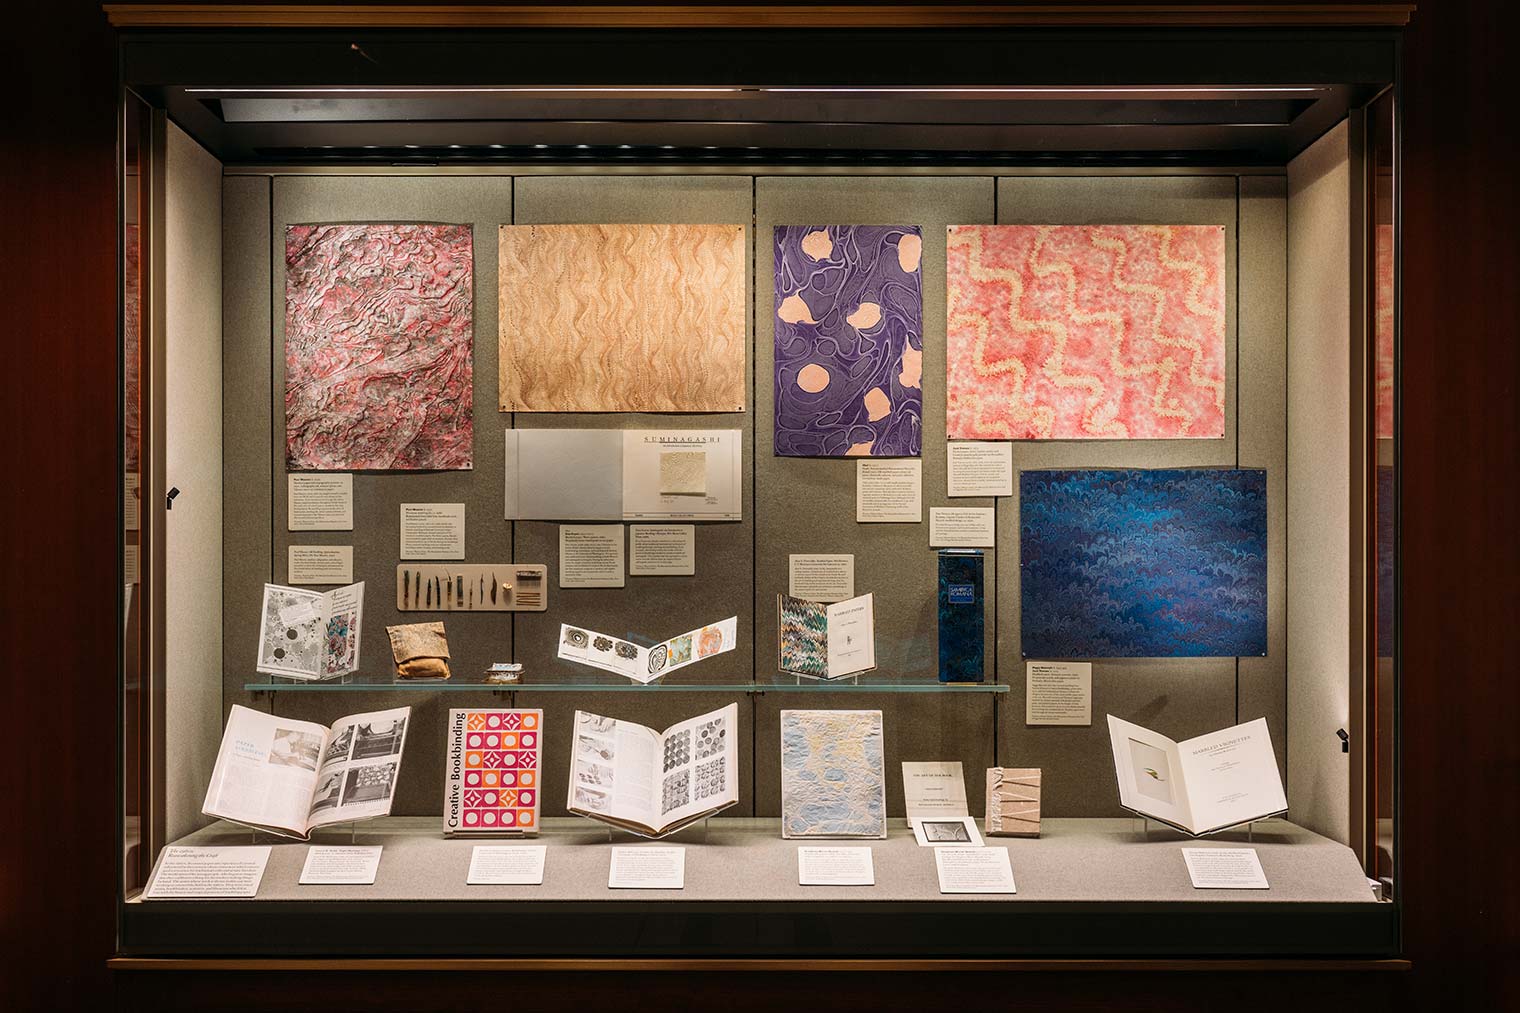 Papers on display in the exhibit